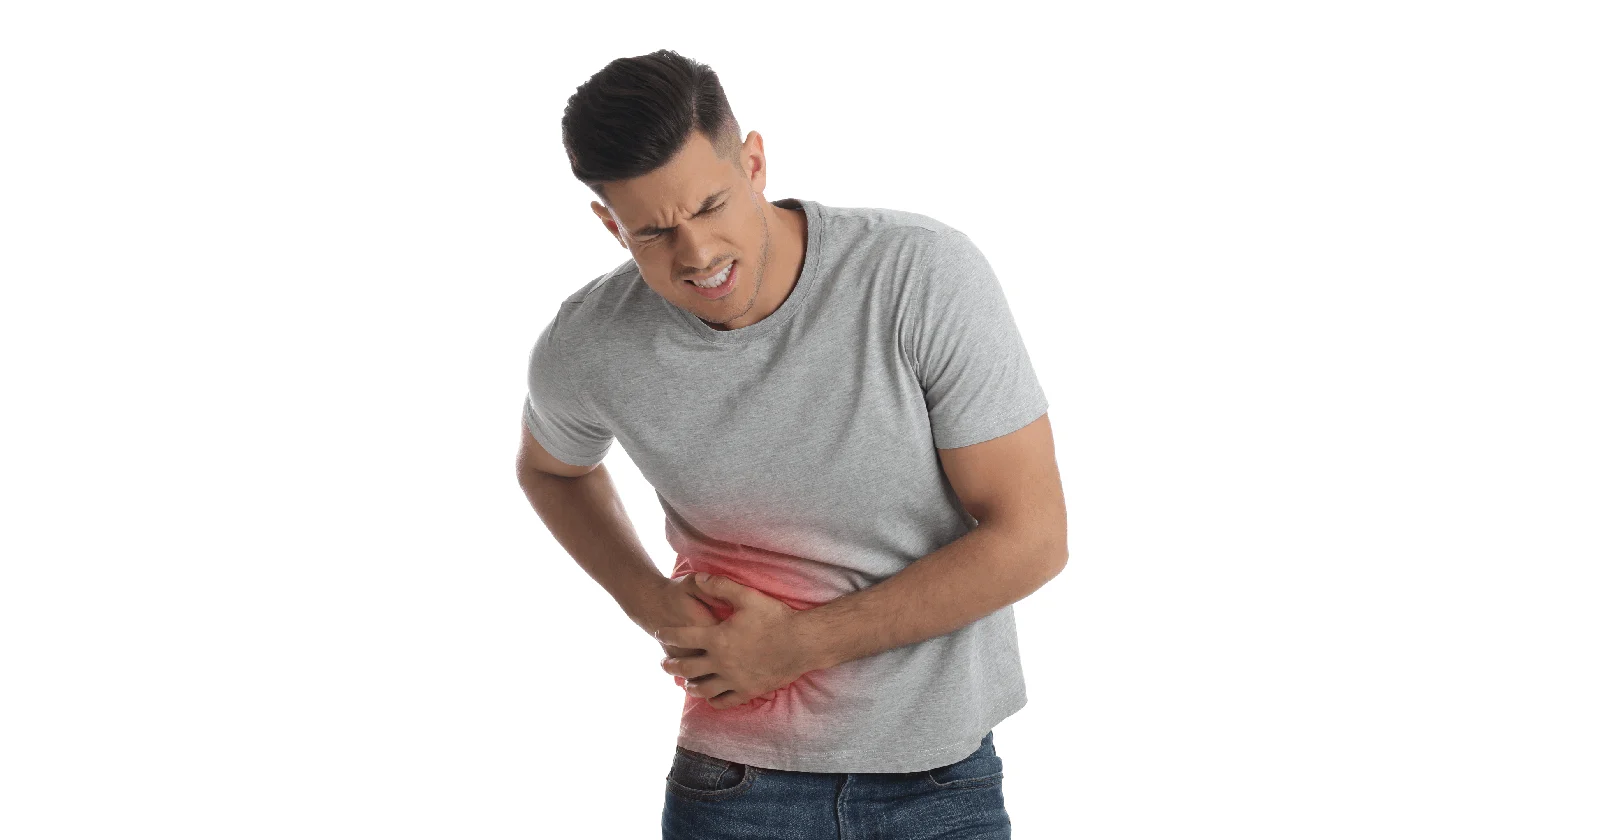 Kidney Pain: Causes, Why kidneys hurt & When to seek care